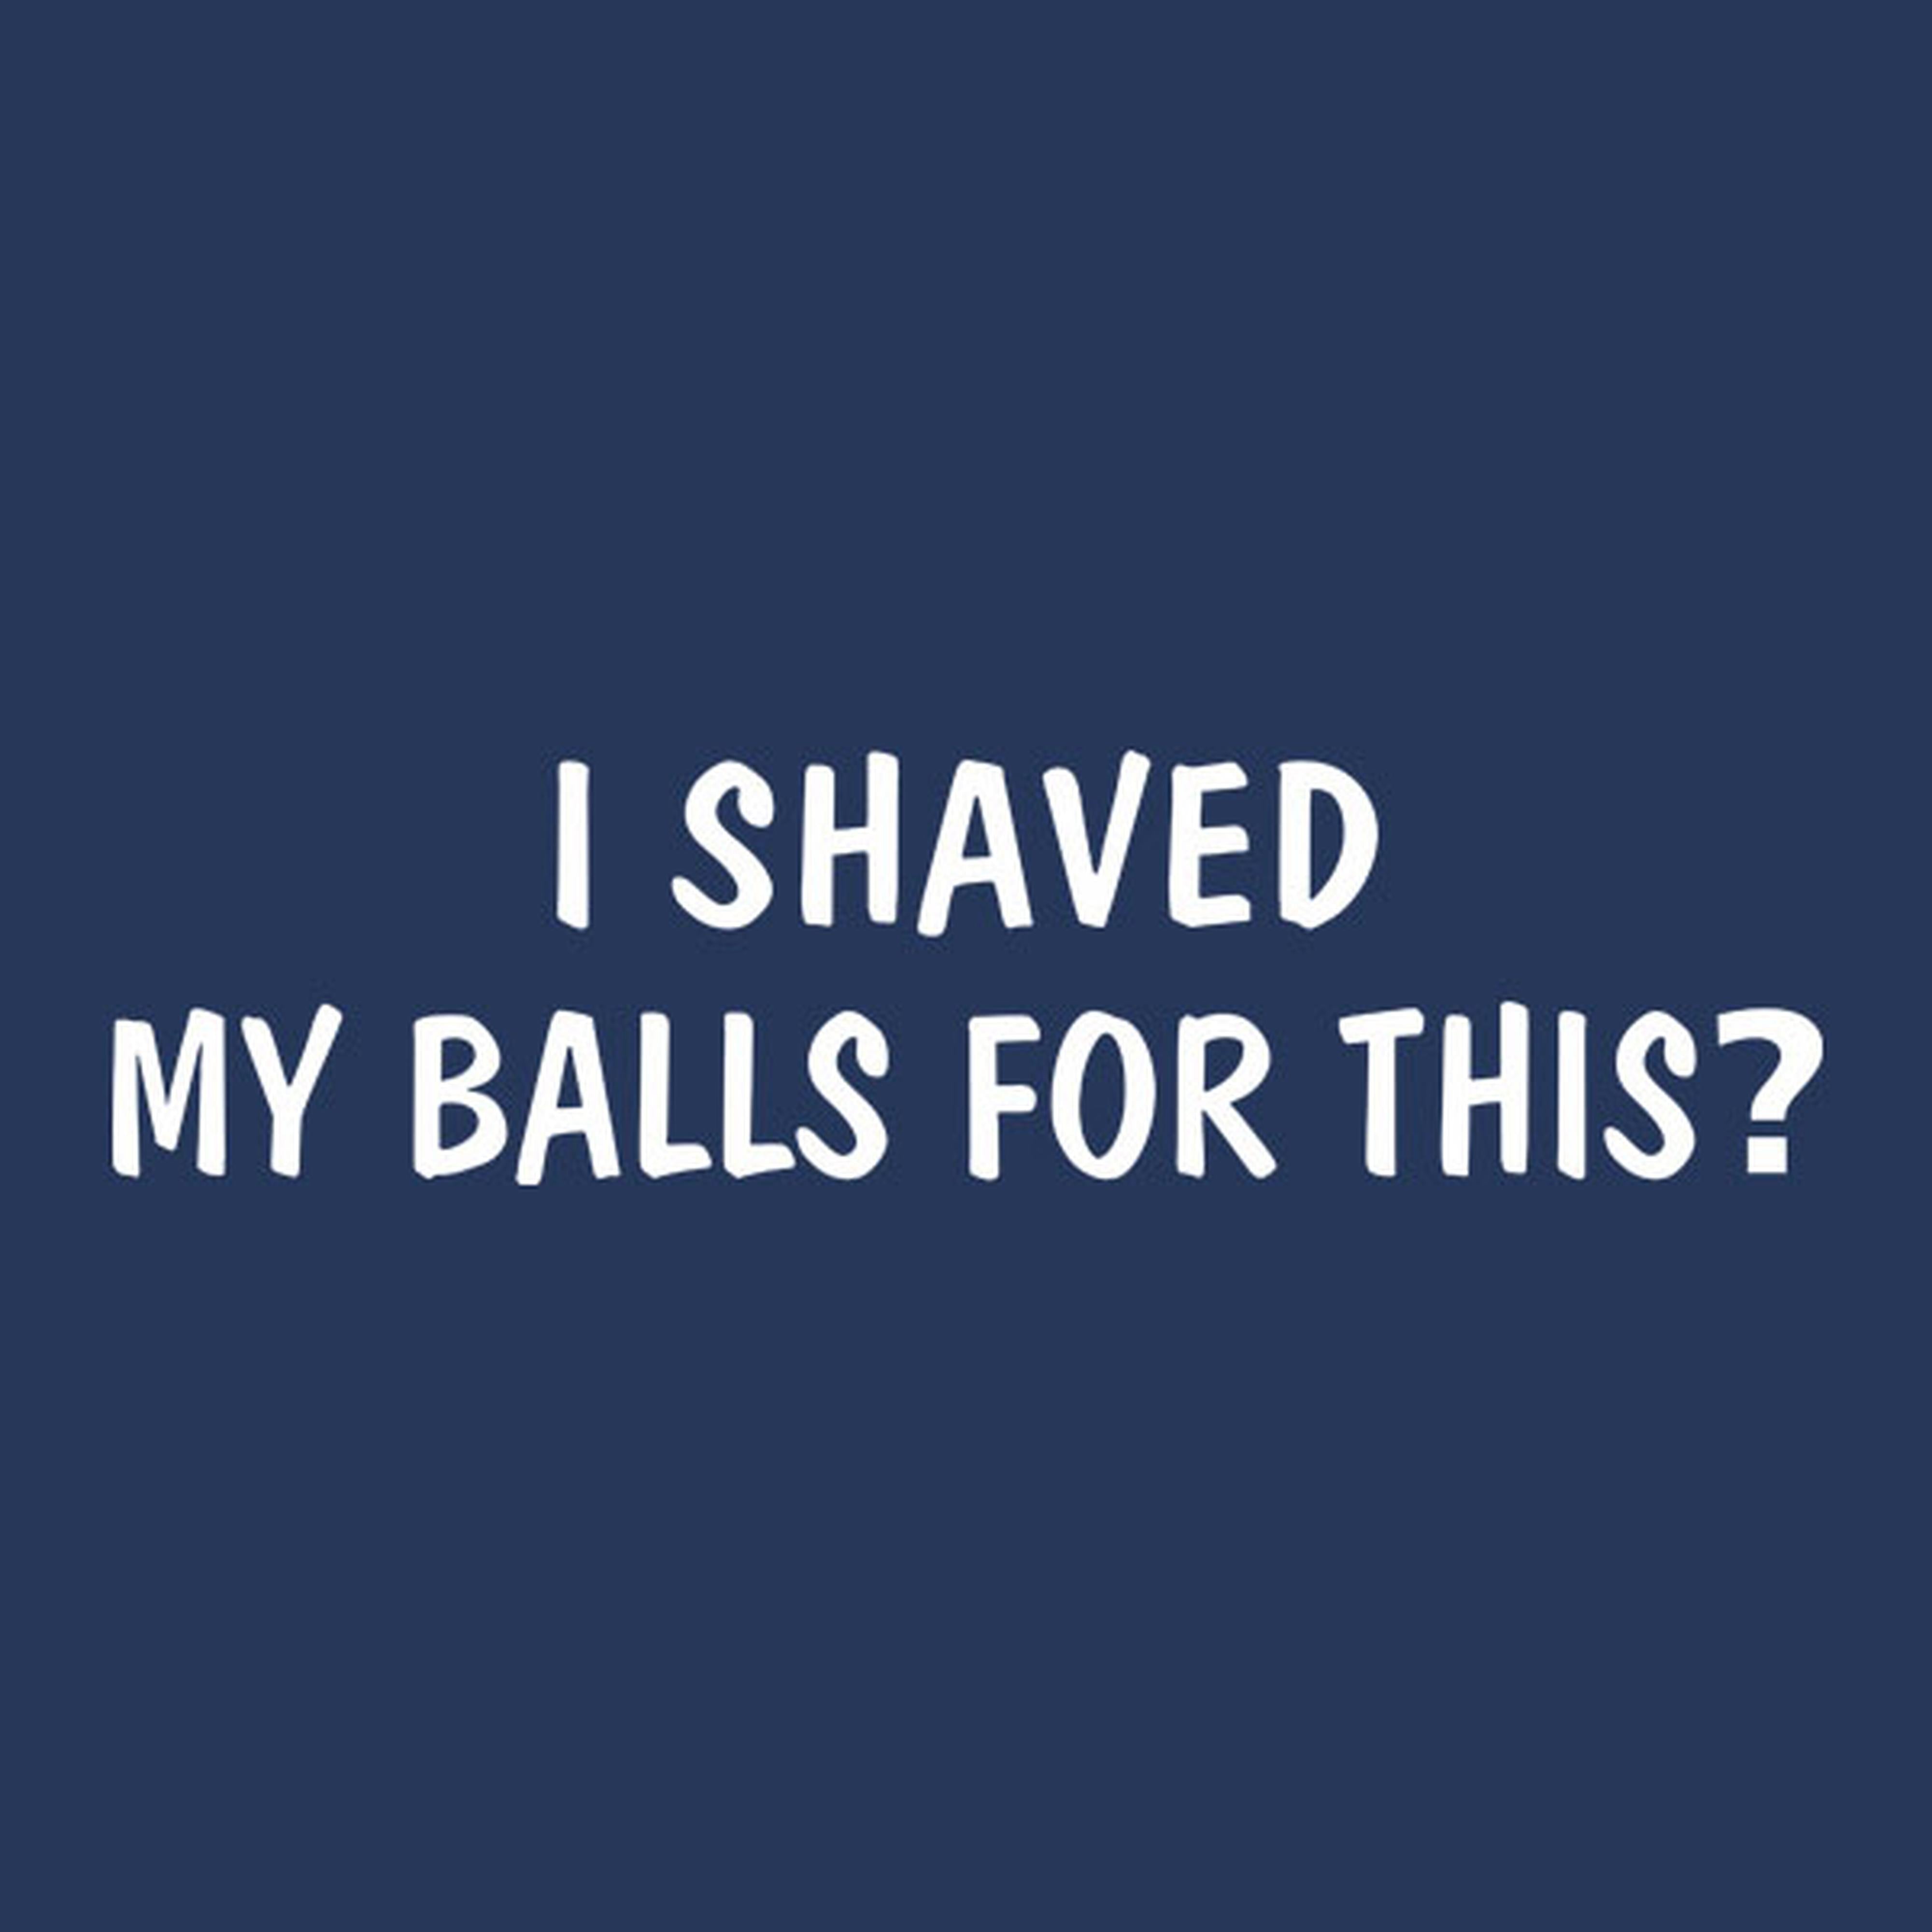 I shaved my balls for this? - T-shirt